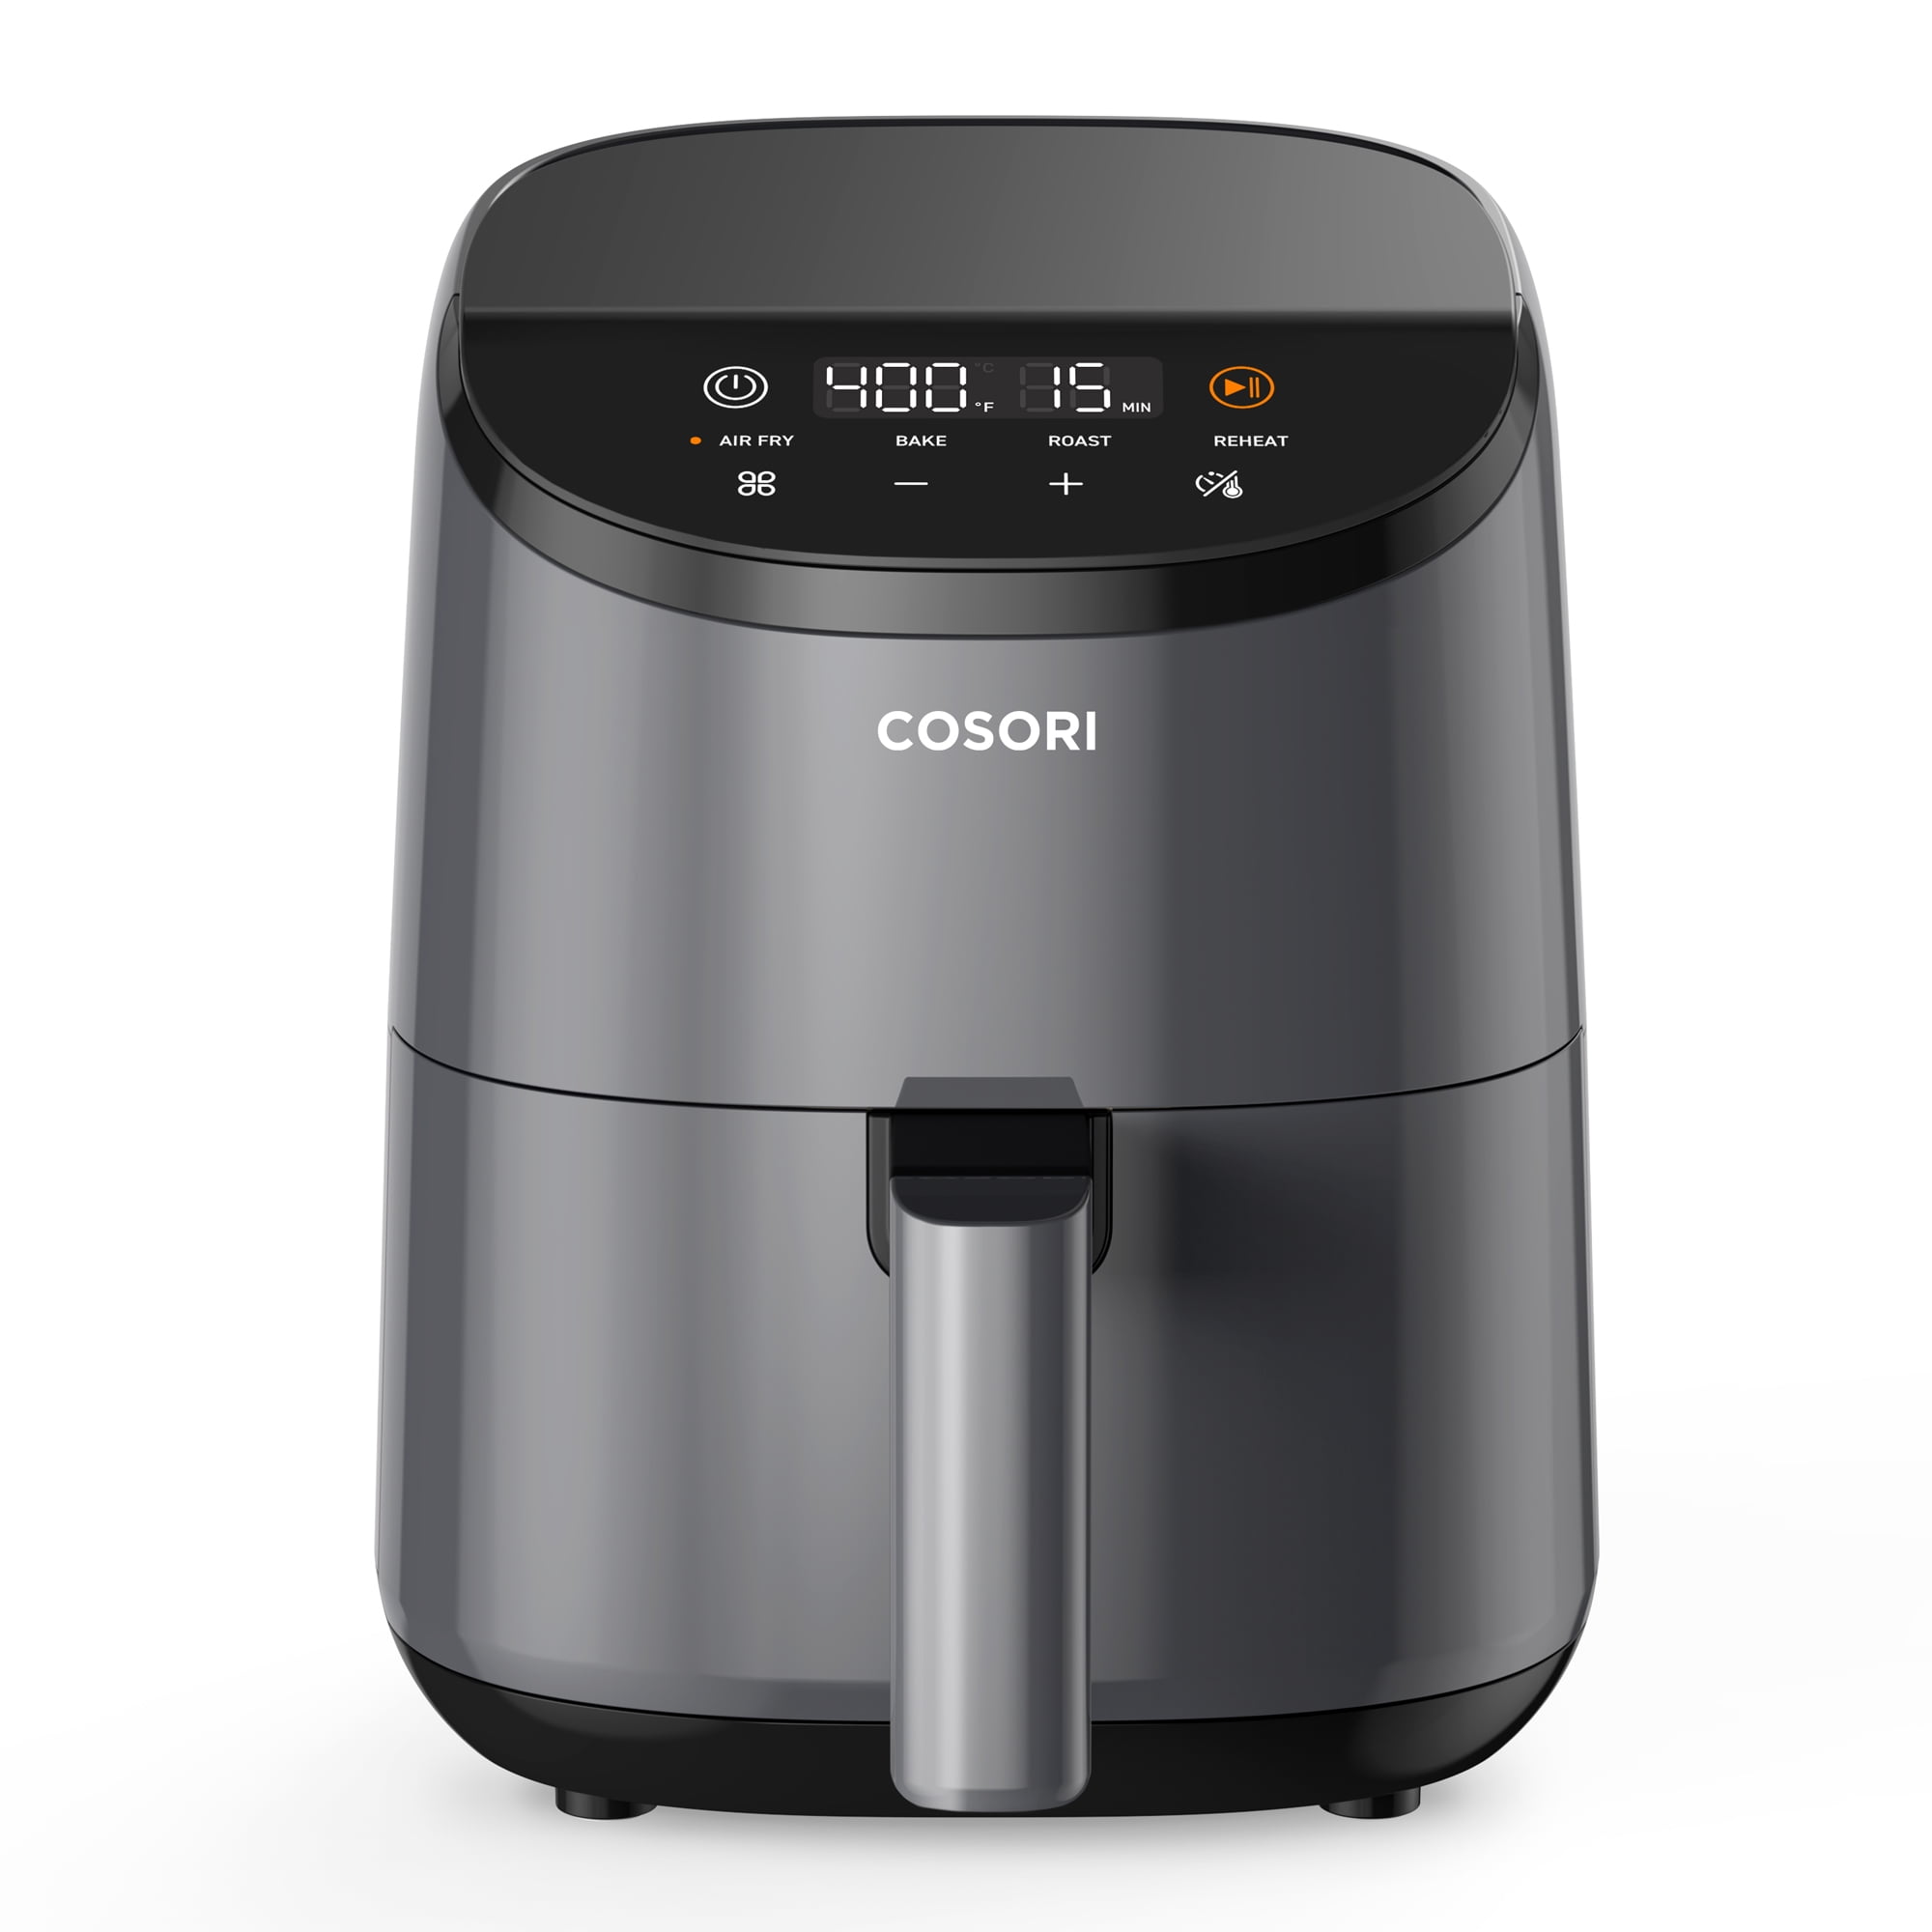 COSORI Launches 2.1-Quart Mini Air Fryer, Compact and Functional